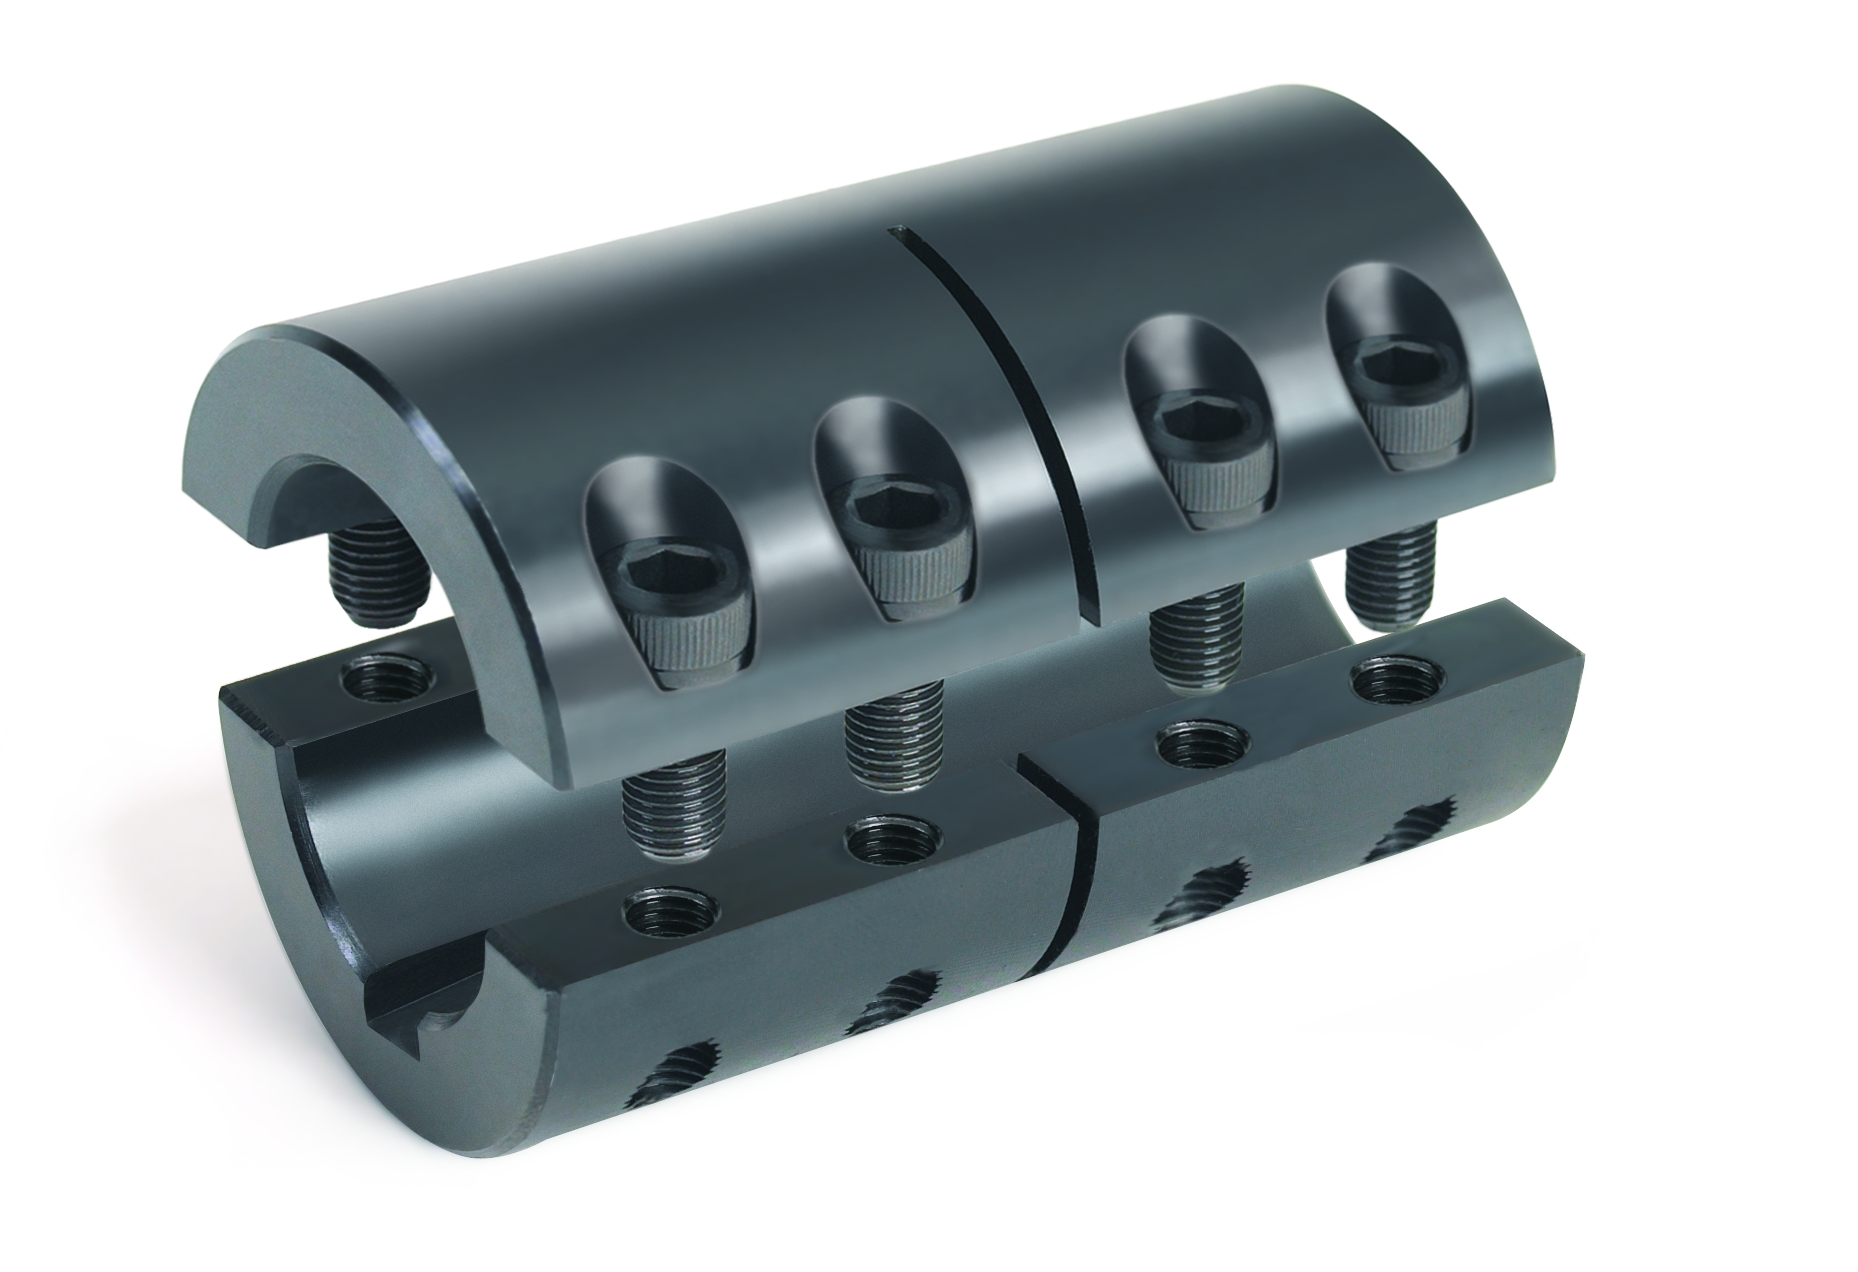 Climax Metal Products 2MISCC-16-16-KW 2MISCC Series Side 1: 16 mm, Bore ASTM A108 Black Oxide Metric Two-Piece Industry Standard Clamping Couplings w/Keyway 2MISCC-Series Steel 